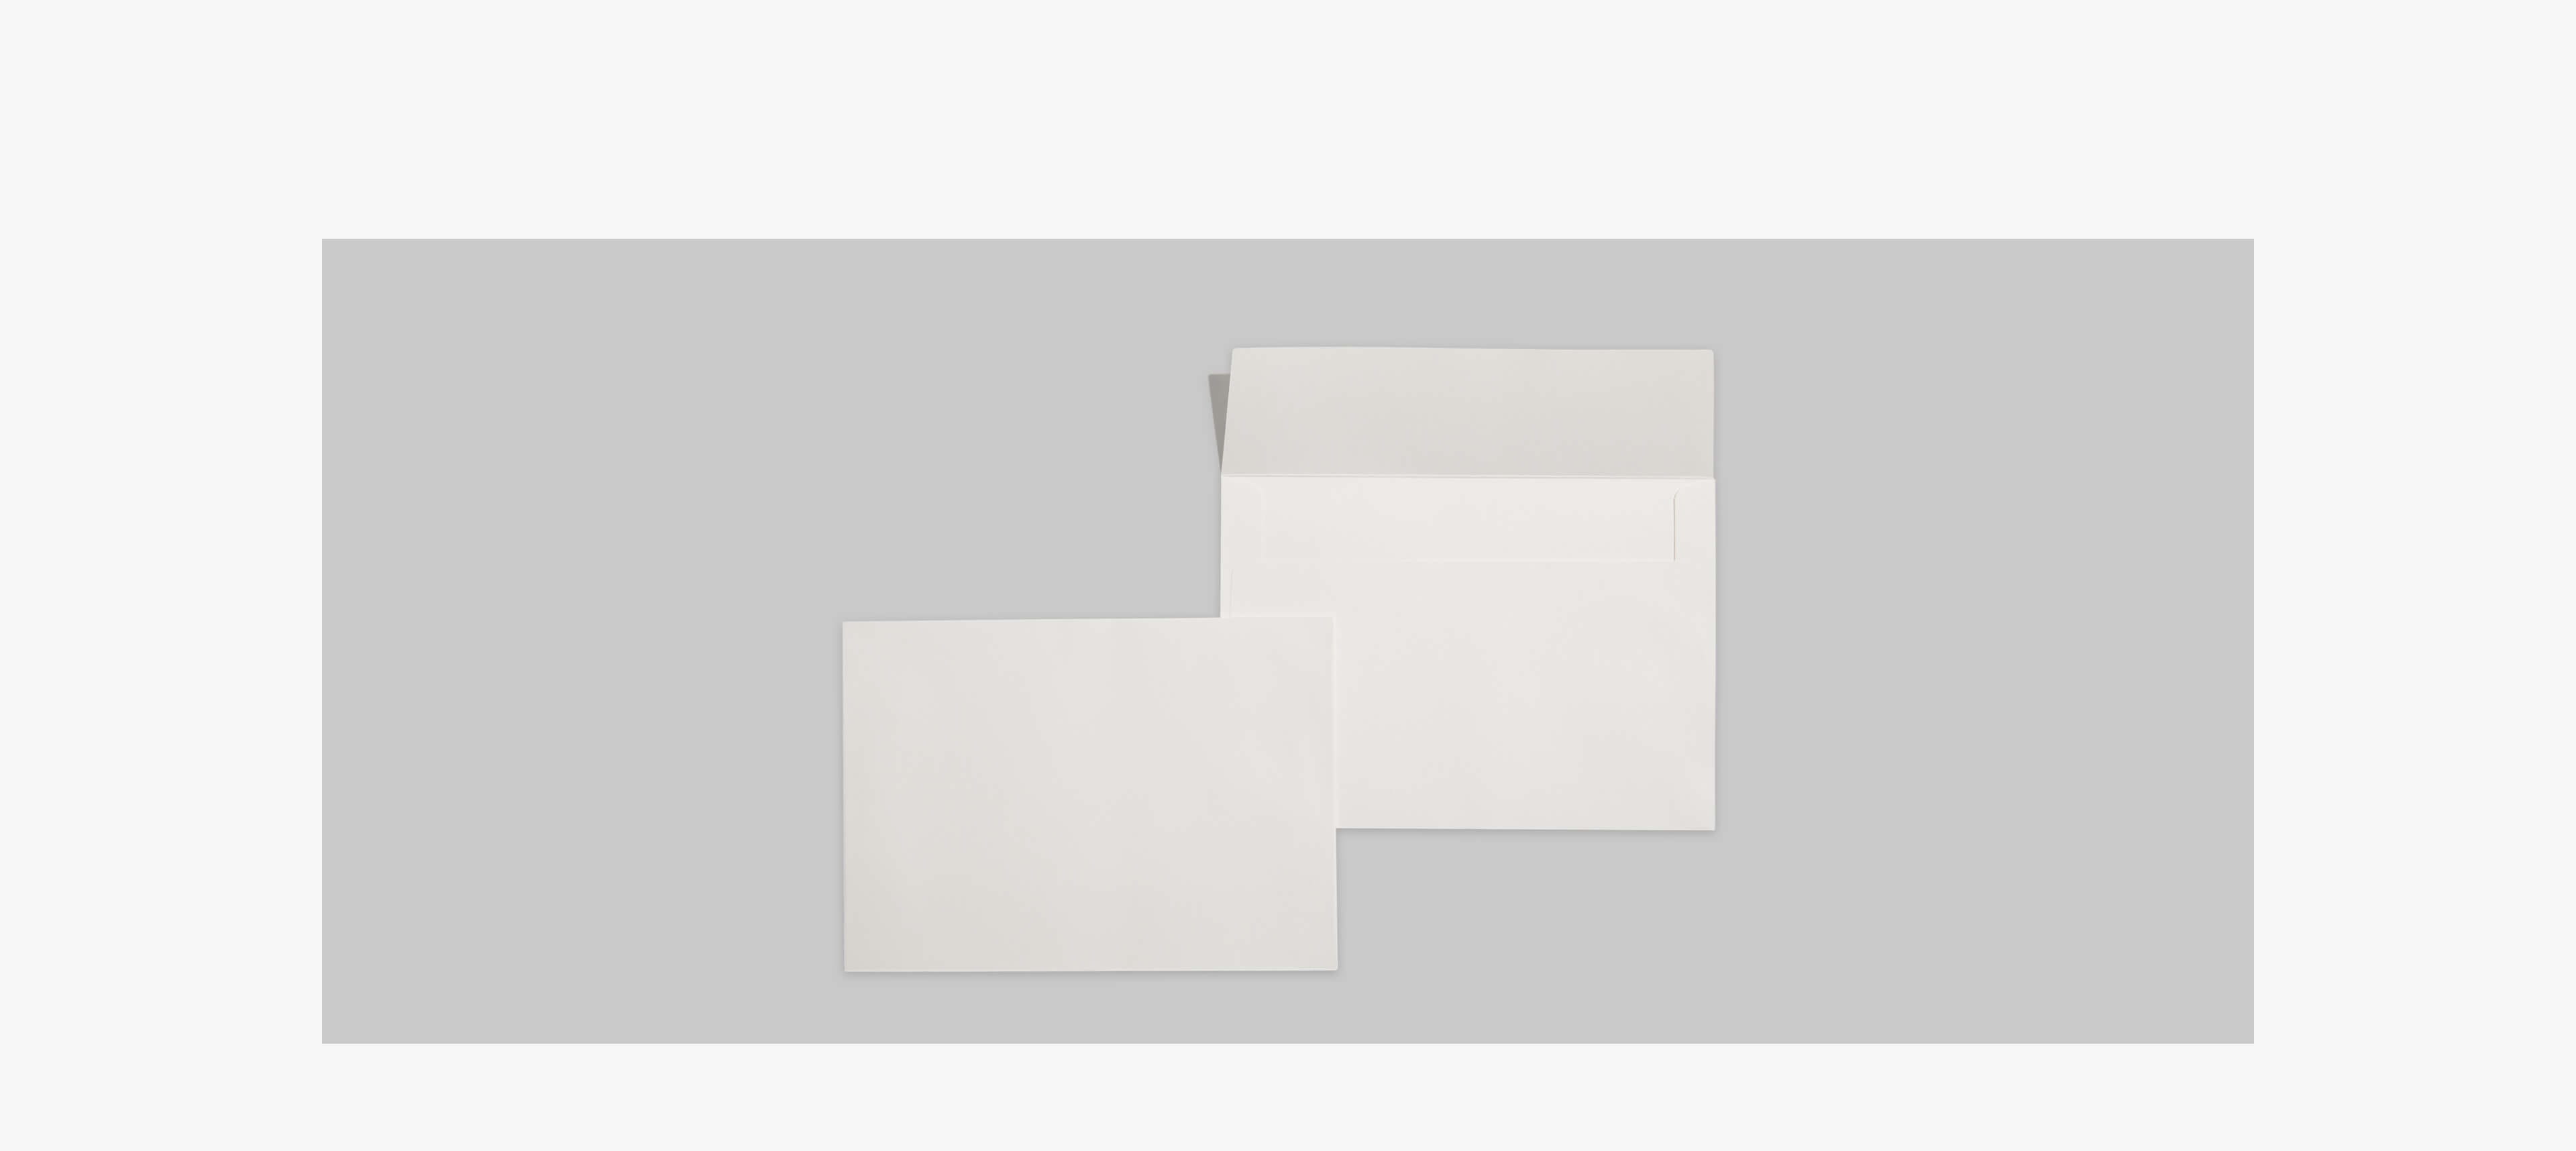 two envelopes on a grey table